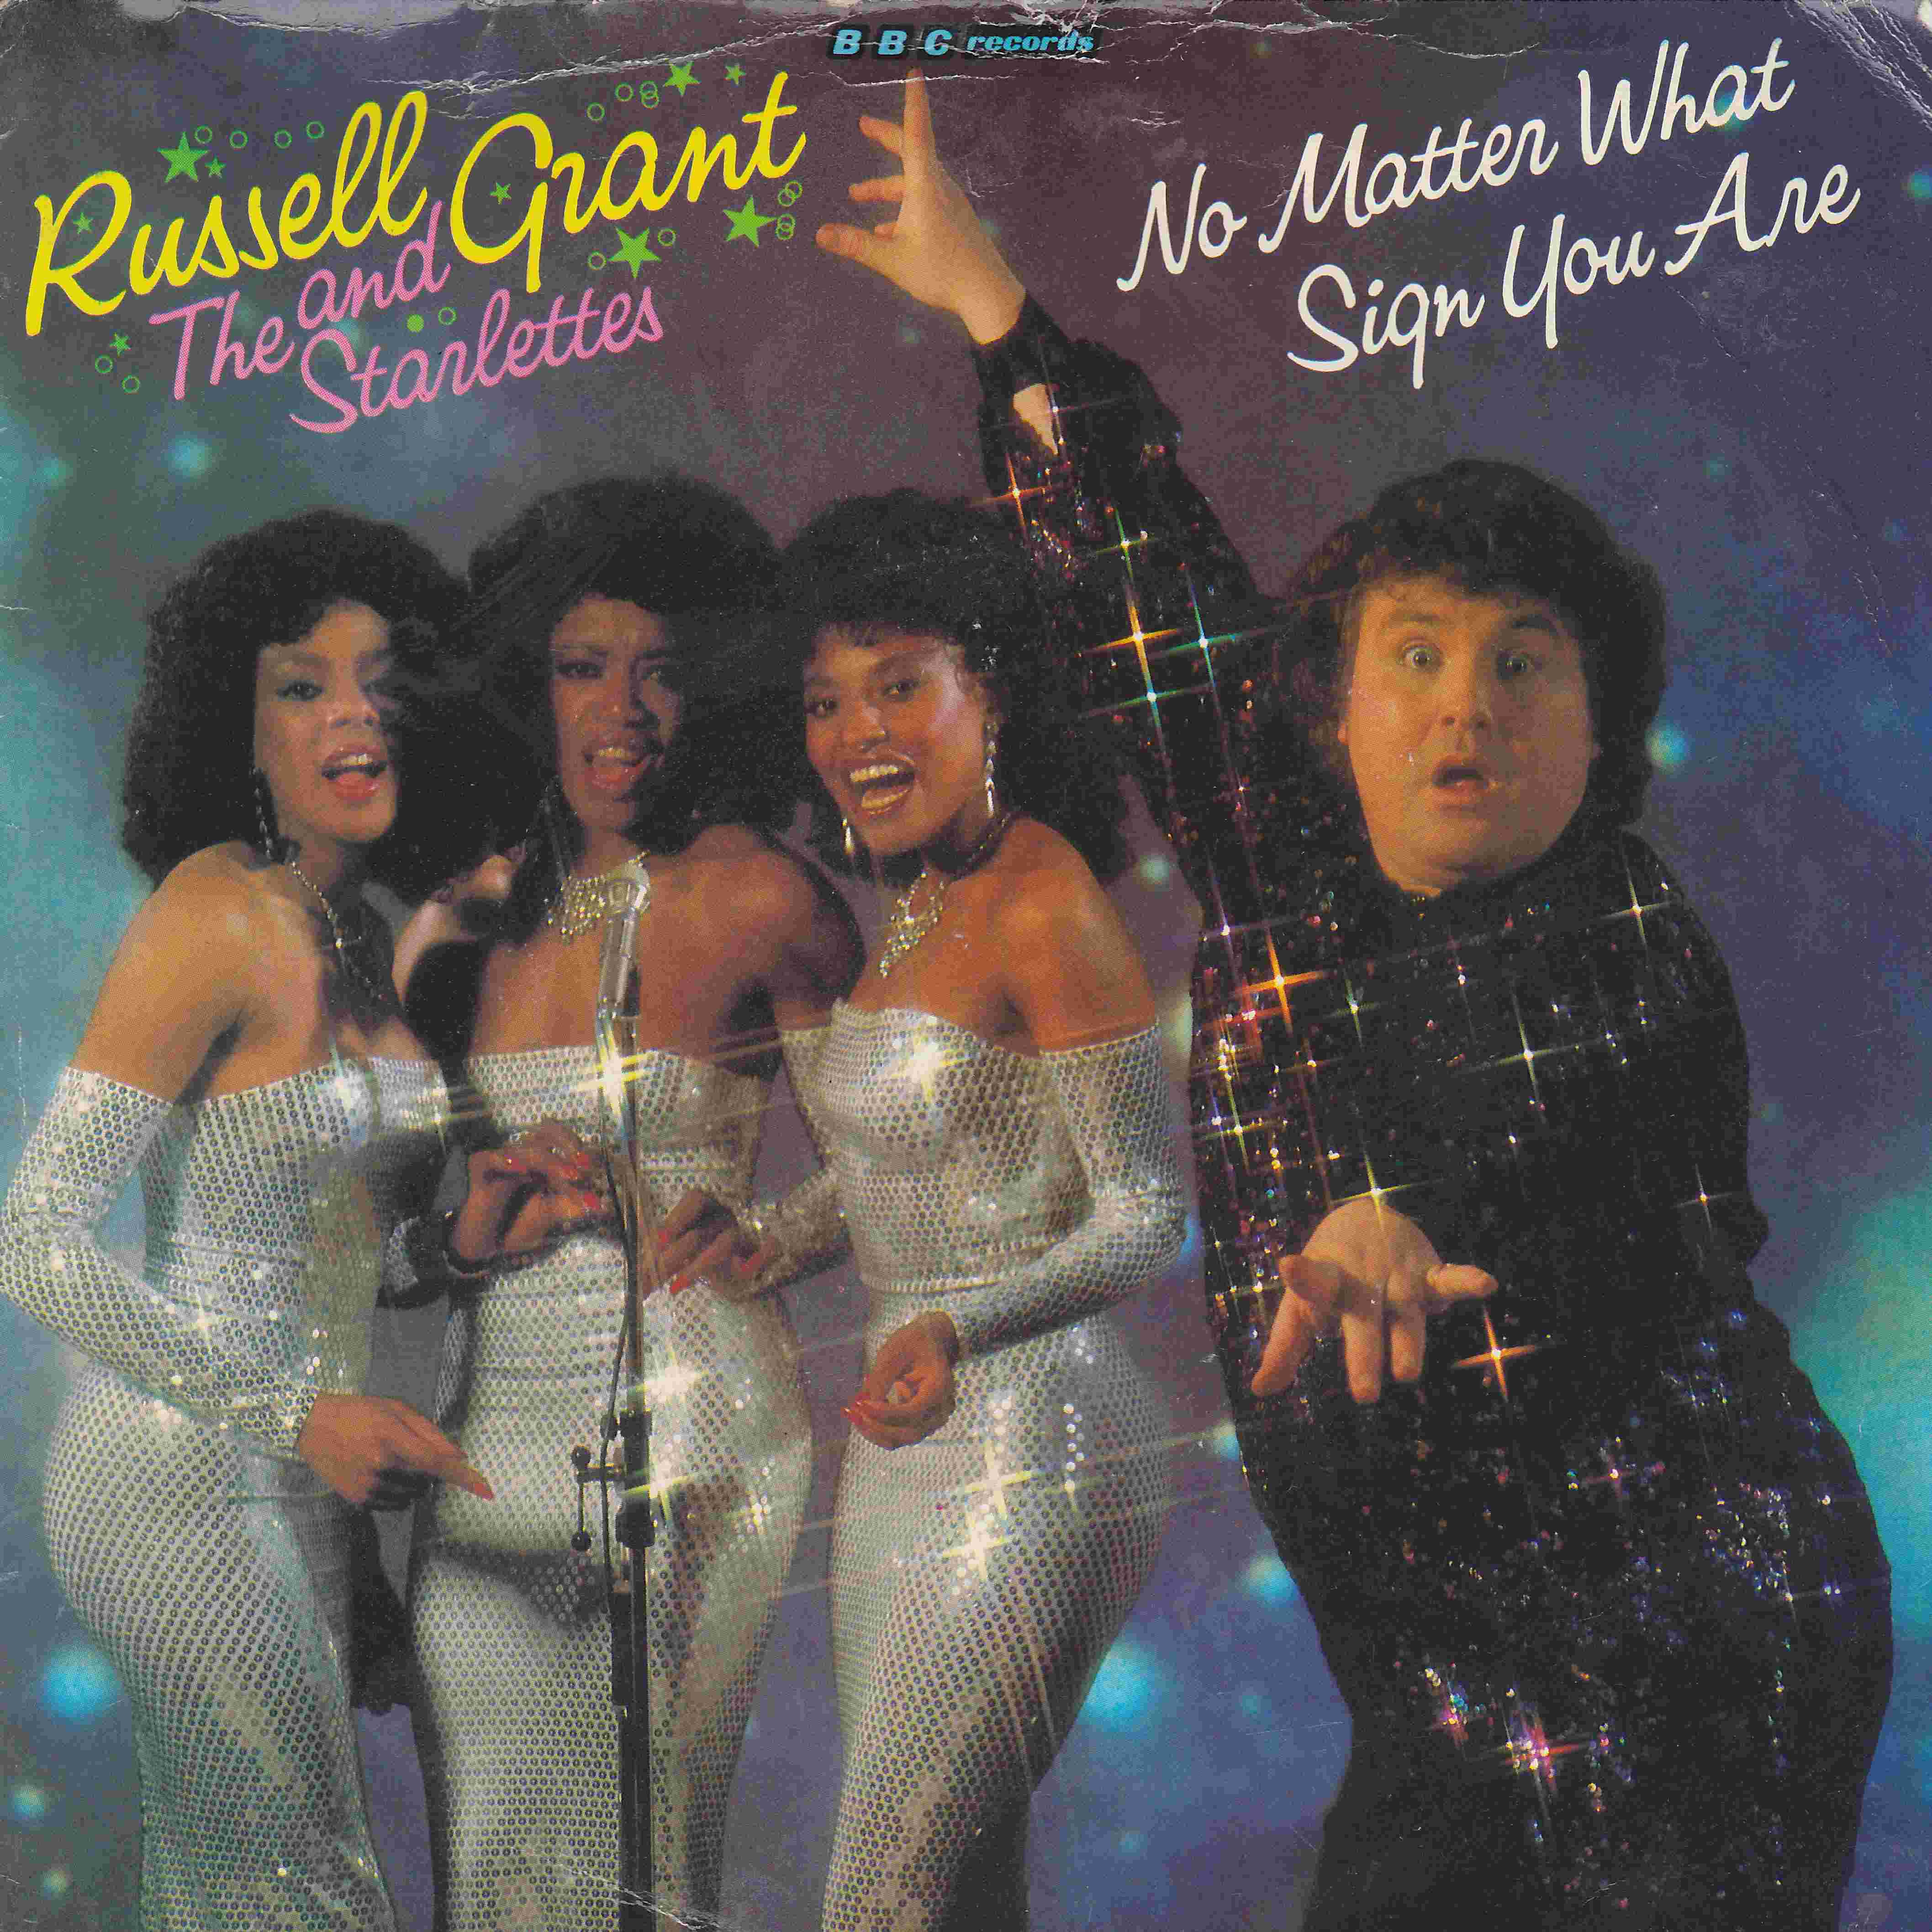 Picture of RESL 131 No matter what sign you are by artist Russell Grant and the Starlettes from the BBC singles - Records and Tapes library